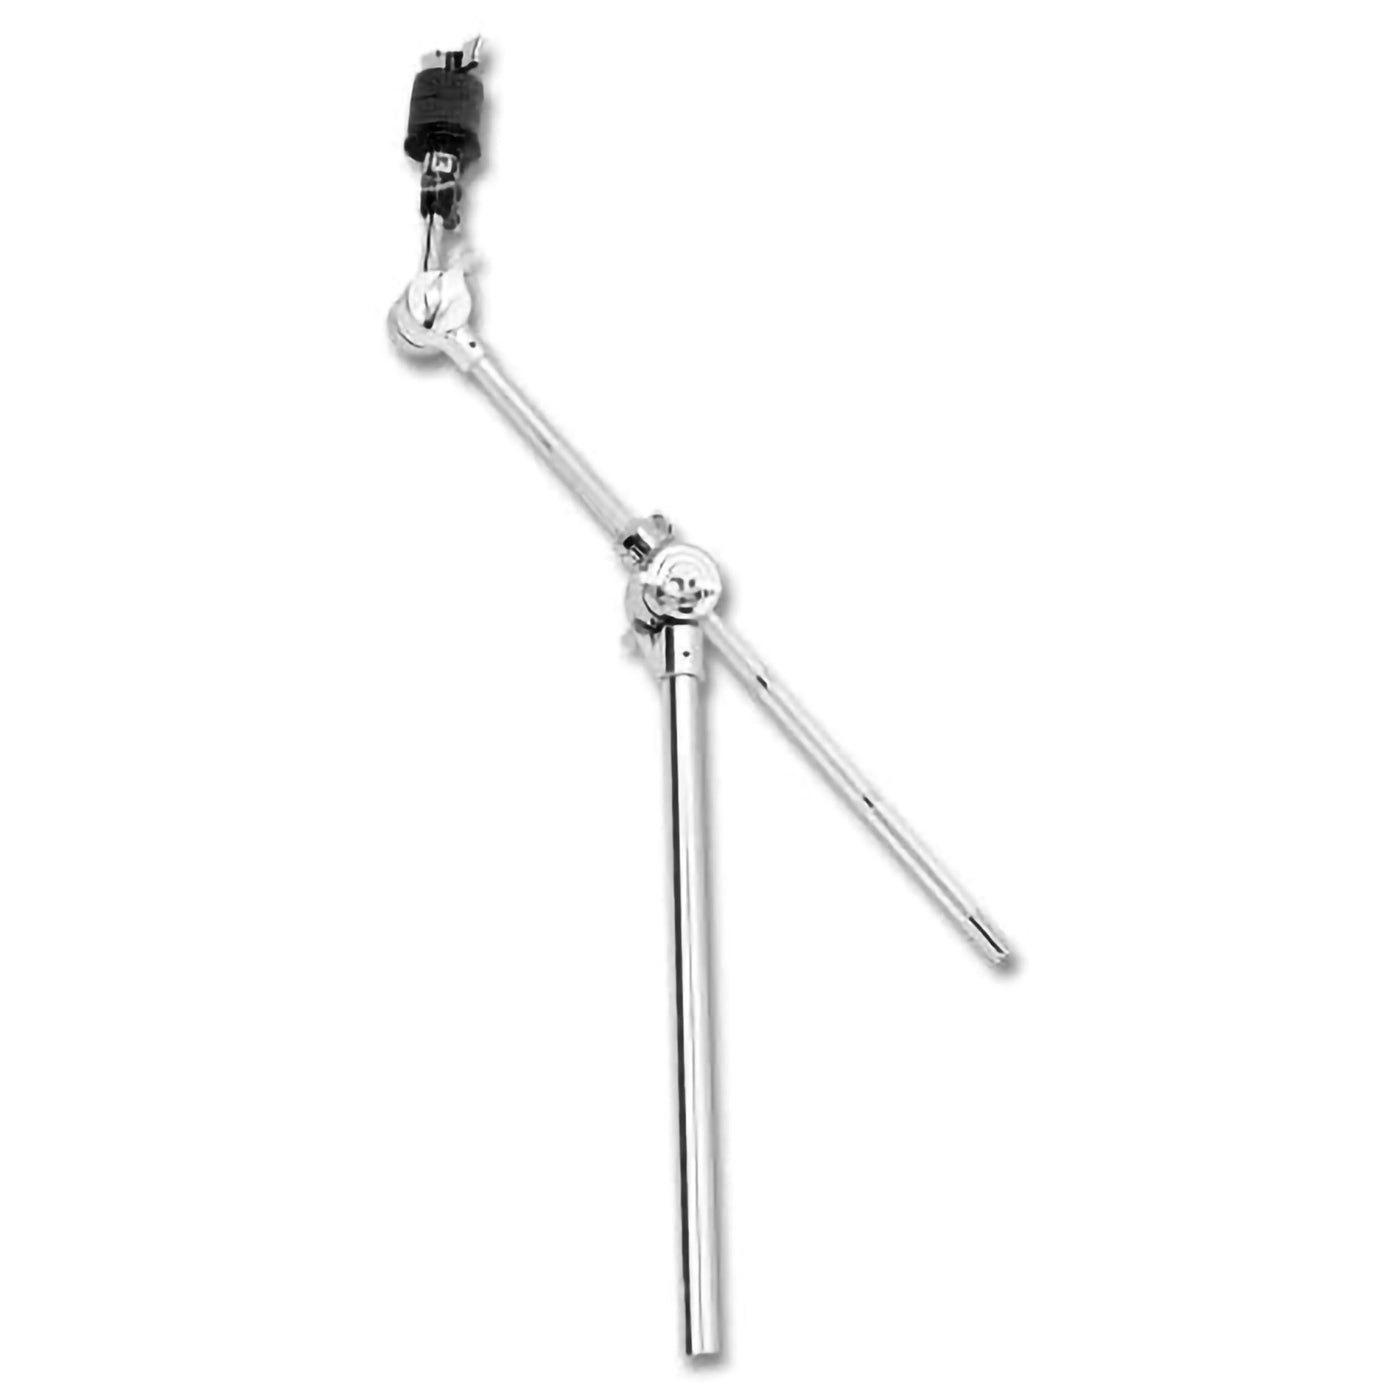 DW Cymbal Boom Arm with 3/4" Tube